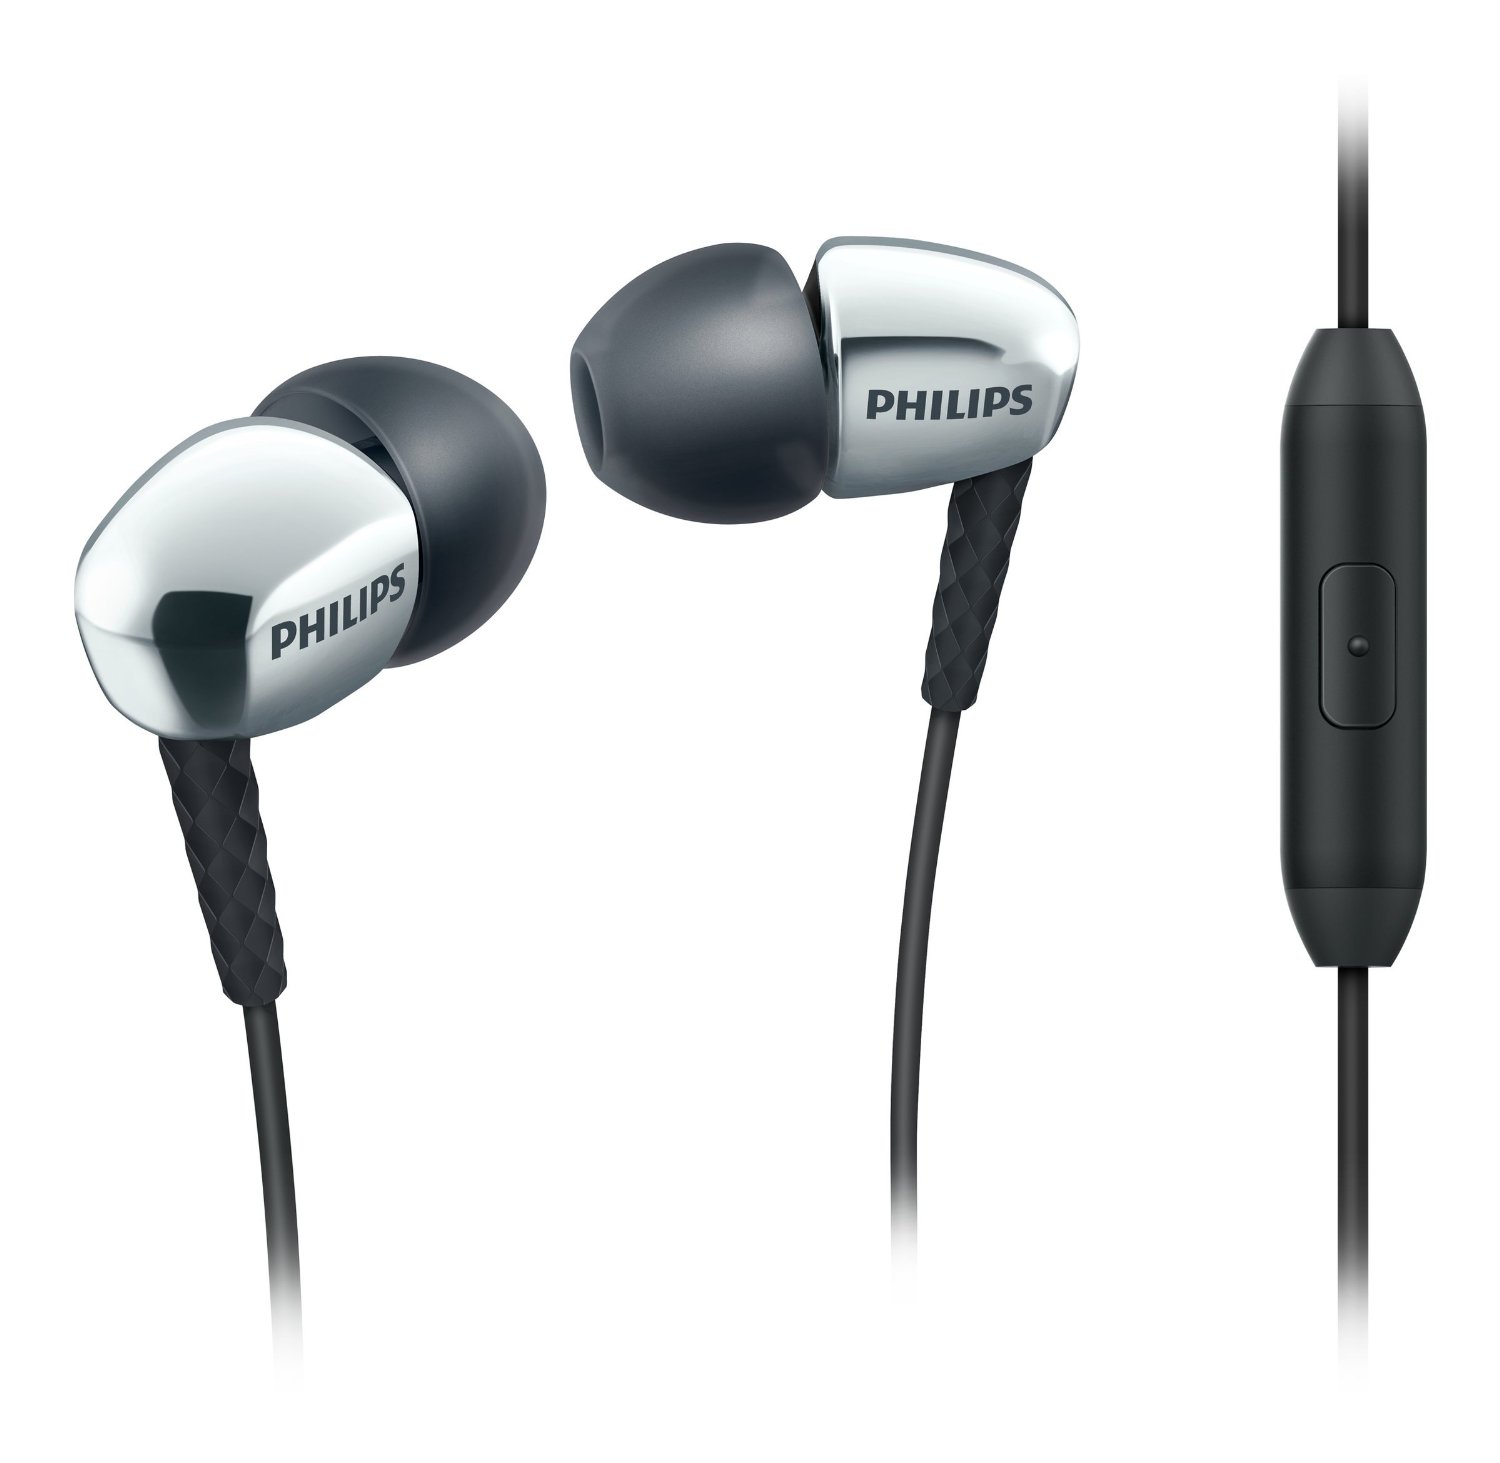 Philips SHE3905 In Ear Headphones with Mic (Silver)